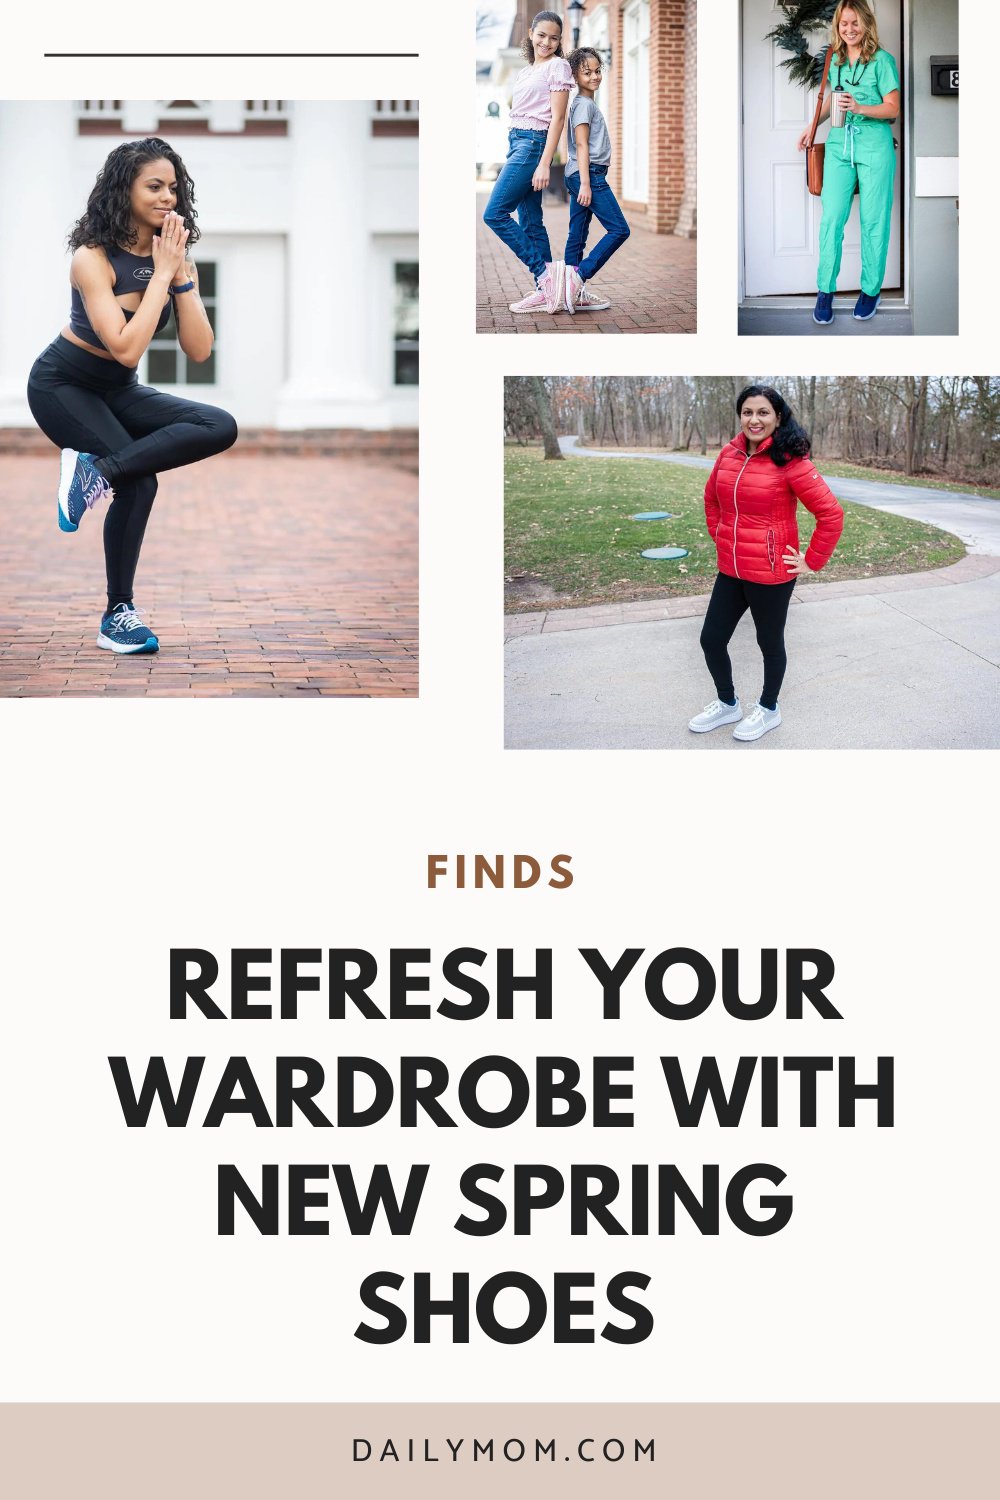 Refresh Your Wardrobe With New Spring Shoes 77 Daily Mom, Magazine For Families